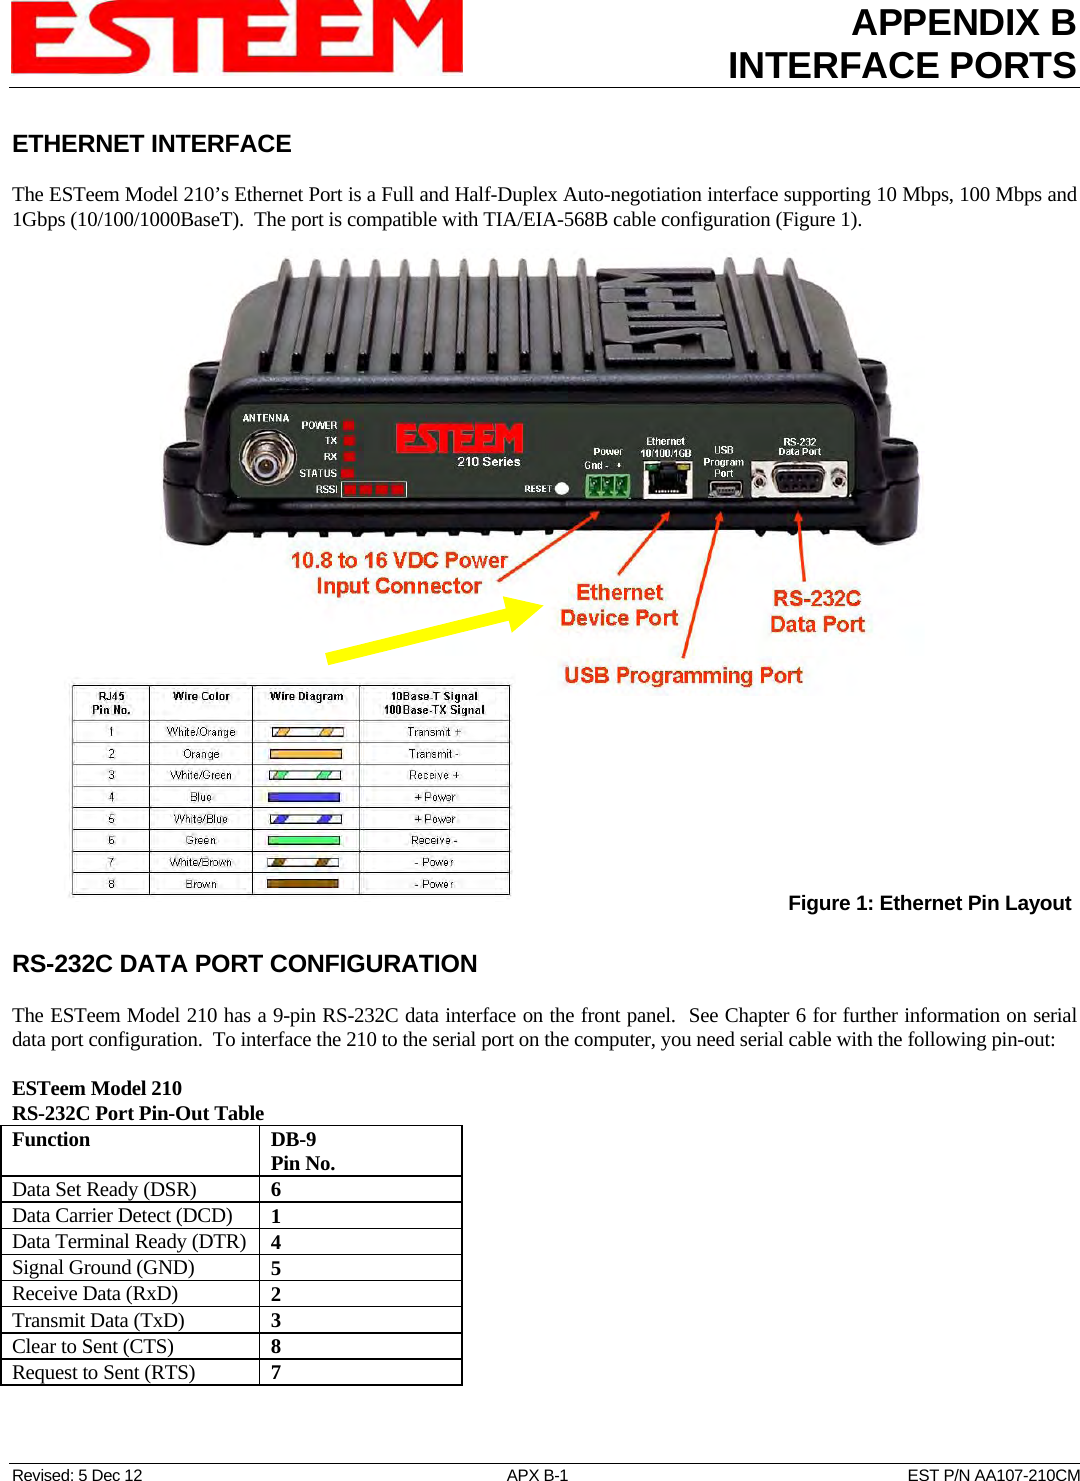 APPENDIX B INTERFACE PORTS   Revised: 5 Dec 12  APX B-1  EST P/N AA107-210CM ETHERNET INTERFACE  The ESTeem Model 210’s Ethernet Port is a Full and Half-Duplex Auto-negotiation interface supporting 10 Mbps, 100 Mbps and 1Gbps (10/100/1000BaseT).  The port is compatible with TIA/EIA-568B cable configuration (Figure 1).          Figure 1: Ethernet Pin Layout RS-232C DATA PORT CONFIGURATION  The ESTeem Model 210 has a 9-pin RS-232C data interface on the front panel.  See Chapter 6 for further information on serial data port configuration.  To interface the 210 to the serial port on the computer, you need serial cable with the following pin-out:  ESTeem Model 210 RS-232C Port Pin-Out Table Function  DB-9 Pin No. Data Set Ready (DSR)  6 Data Carrier Detect (DCD)  1 Data Terminal Ready (DTR)  4 Signal Ground (GND)  5 Receive Data (RxD)  2 Transmit Data (TxD)  3 Clear to Sent (CTS)  8 Request to Sent (RTS)  7  